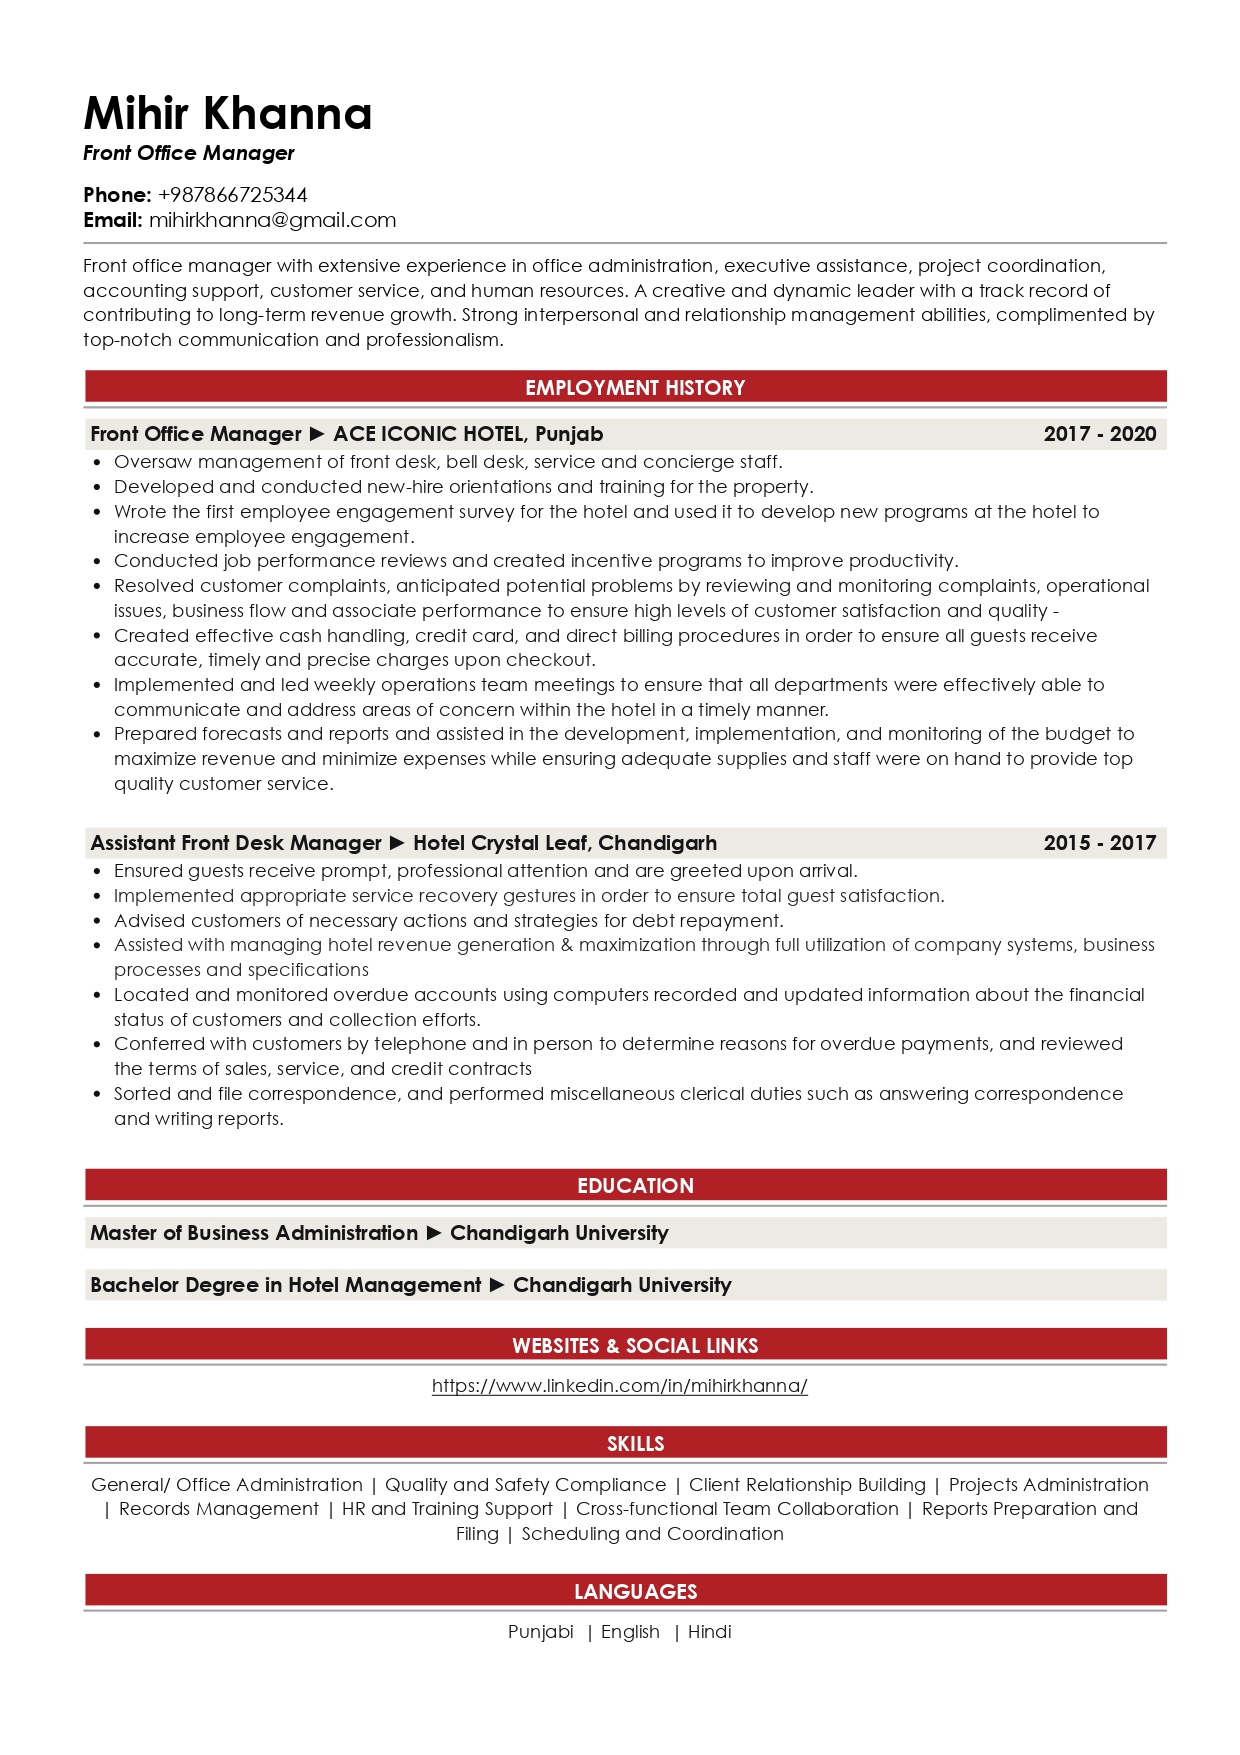 Sample Resume of Front Office Manager | Free Resume Templates & Samples on Resumod.co